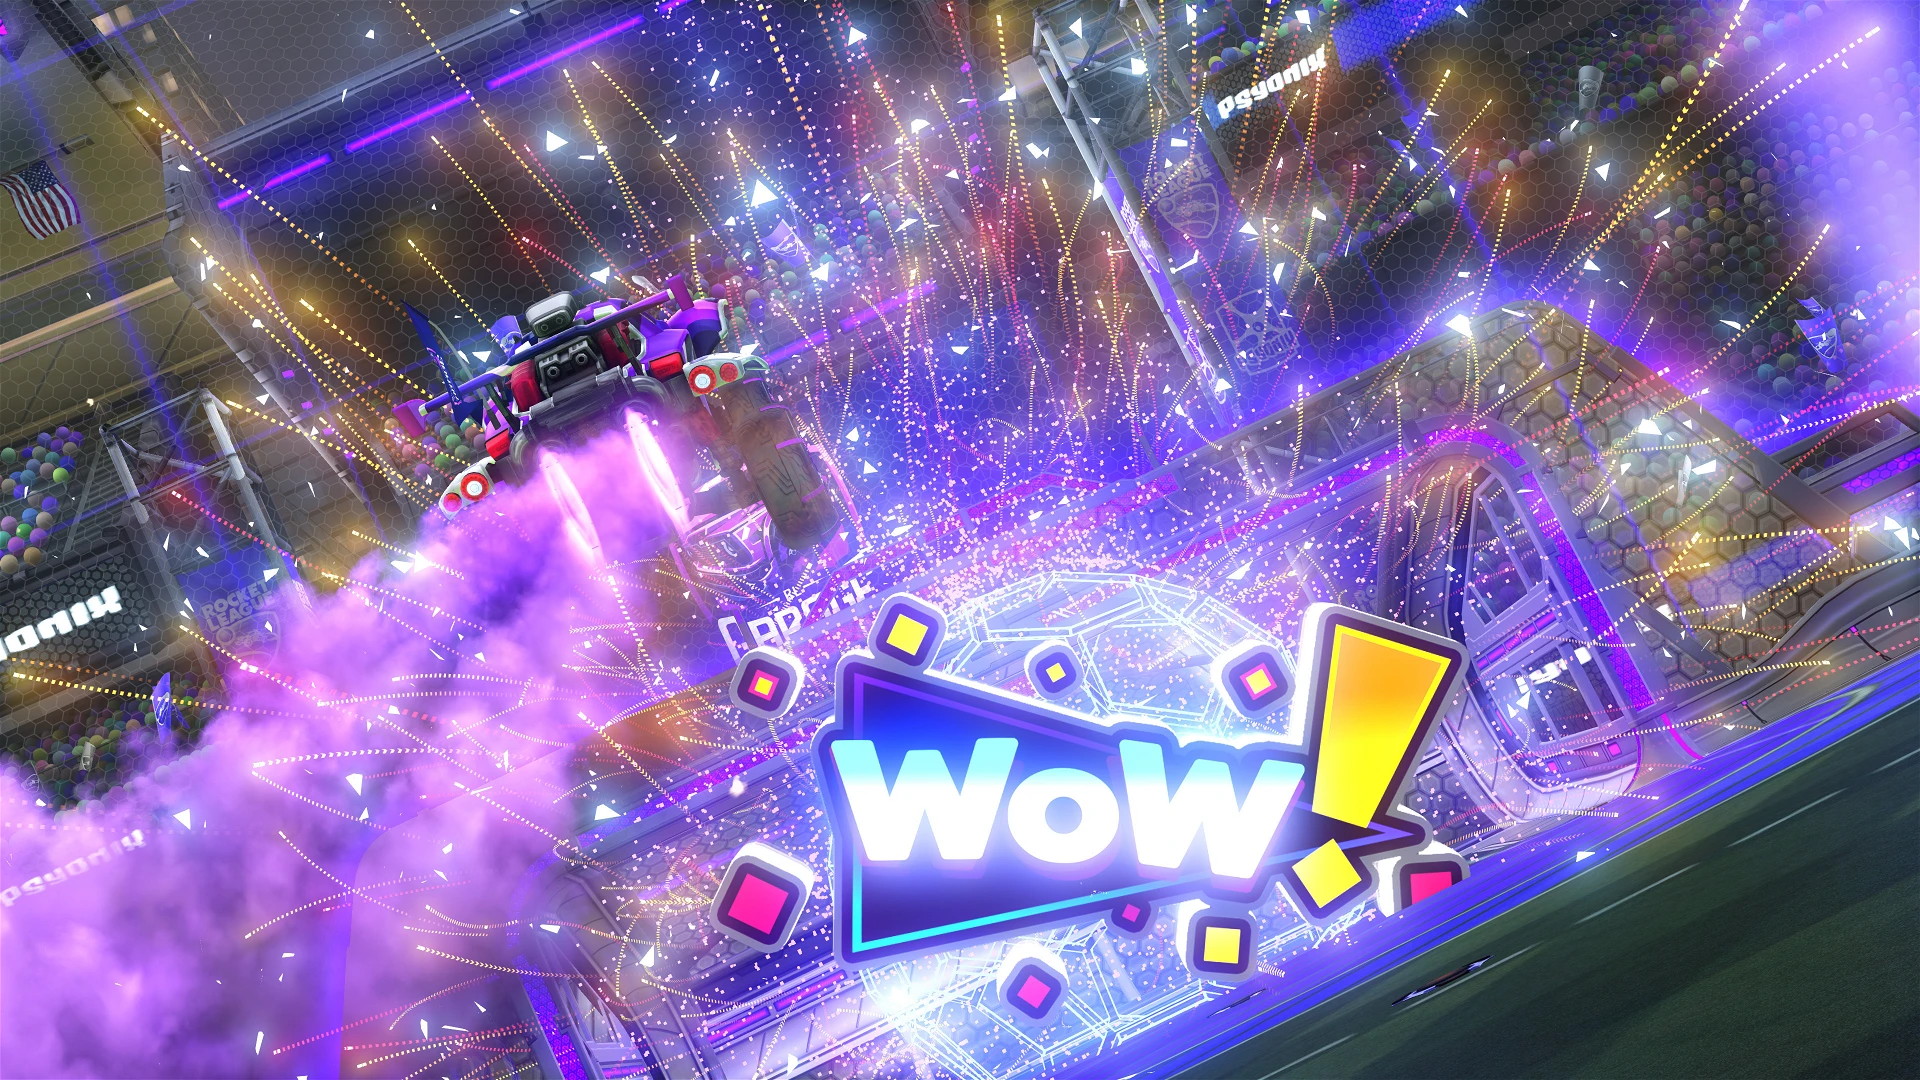 How to Get the Wow Goal Explosion in Rocket League 